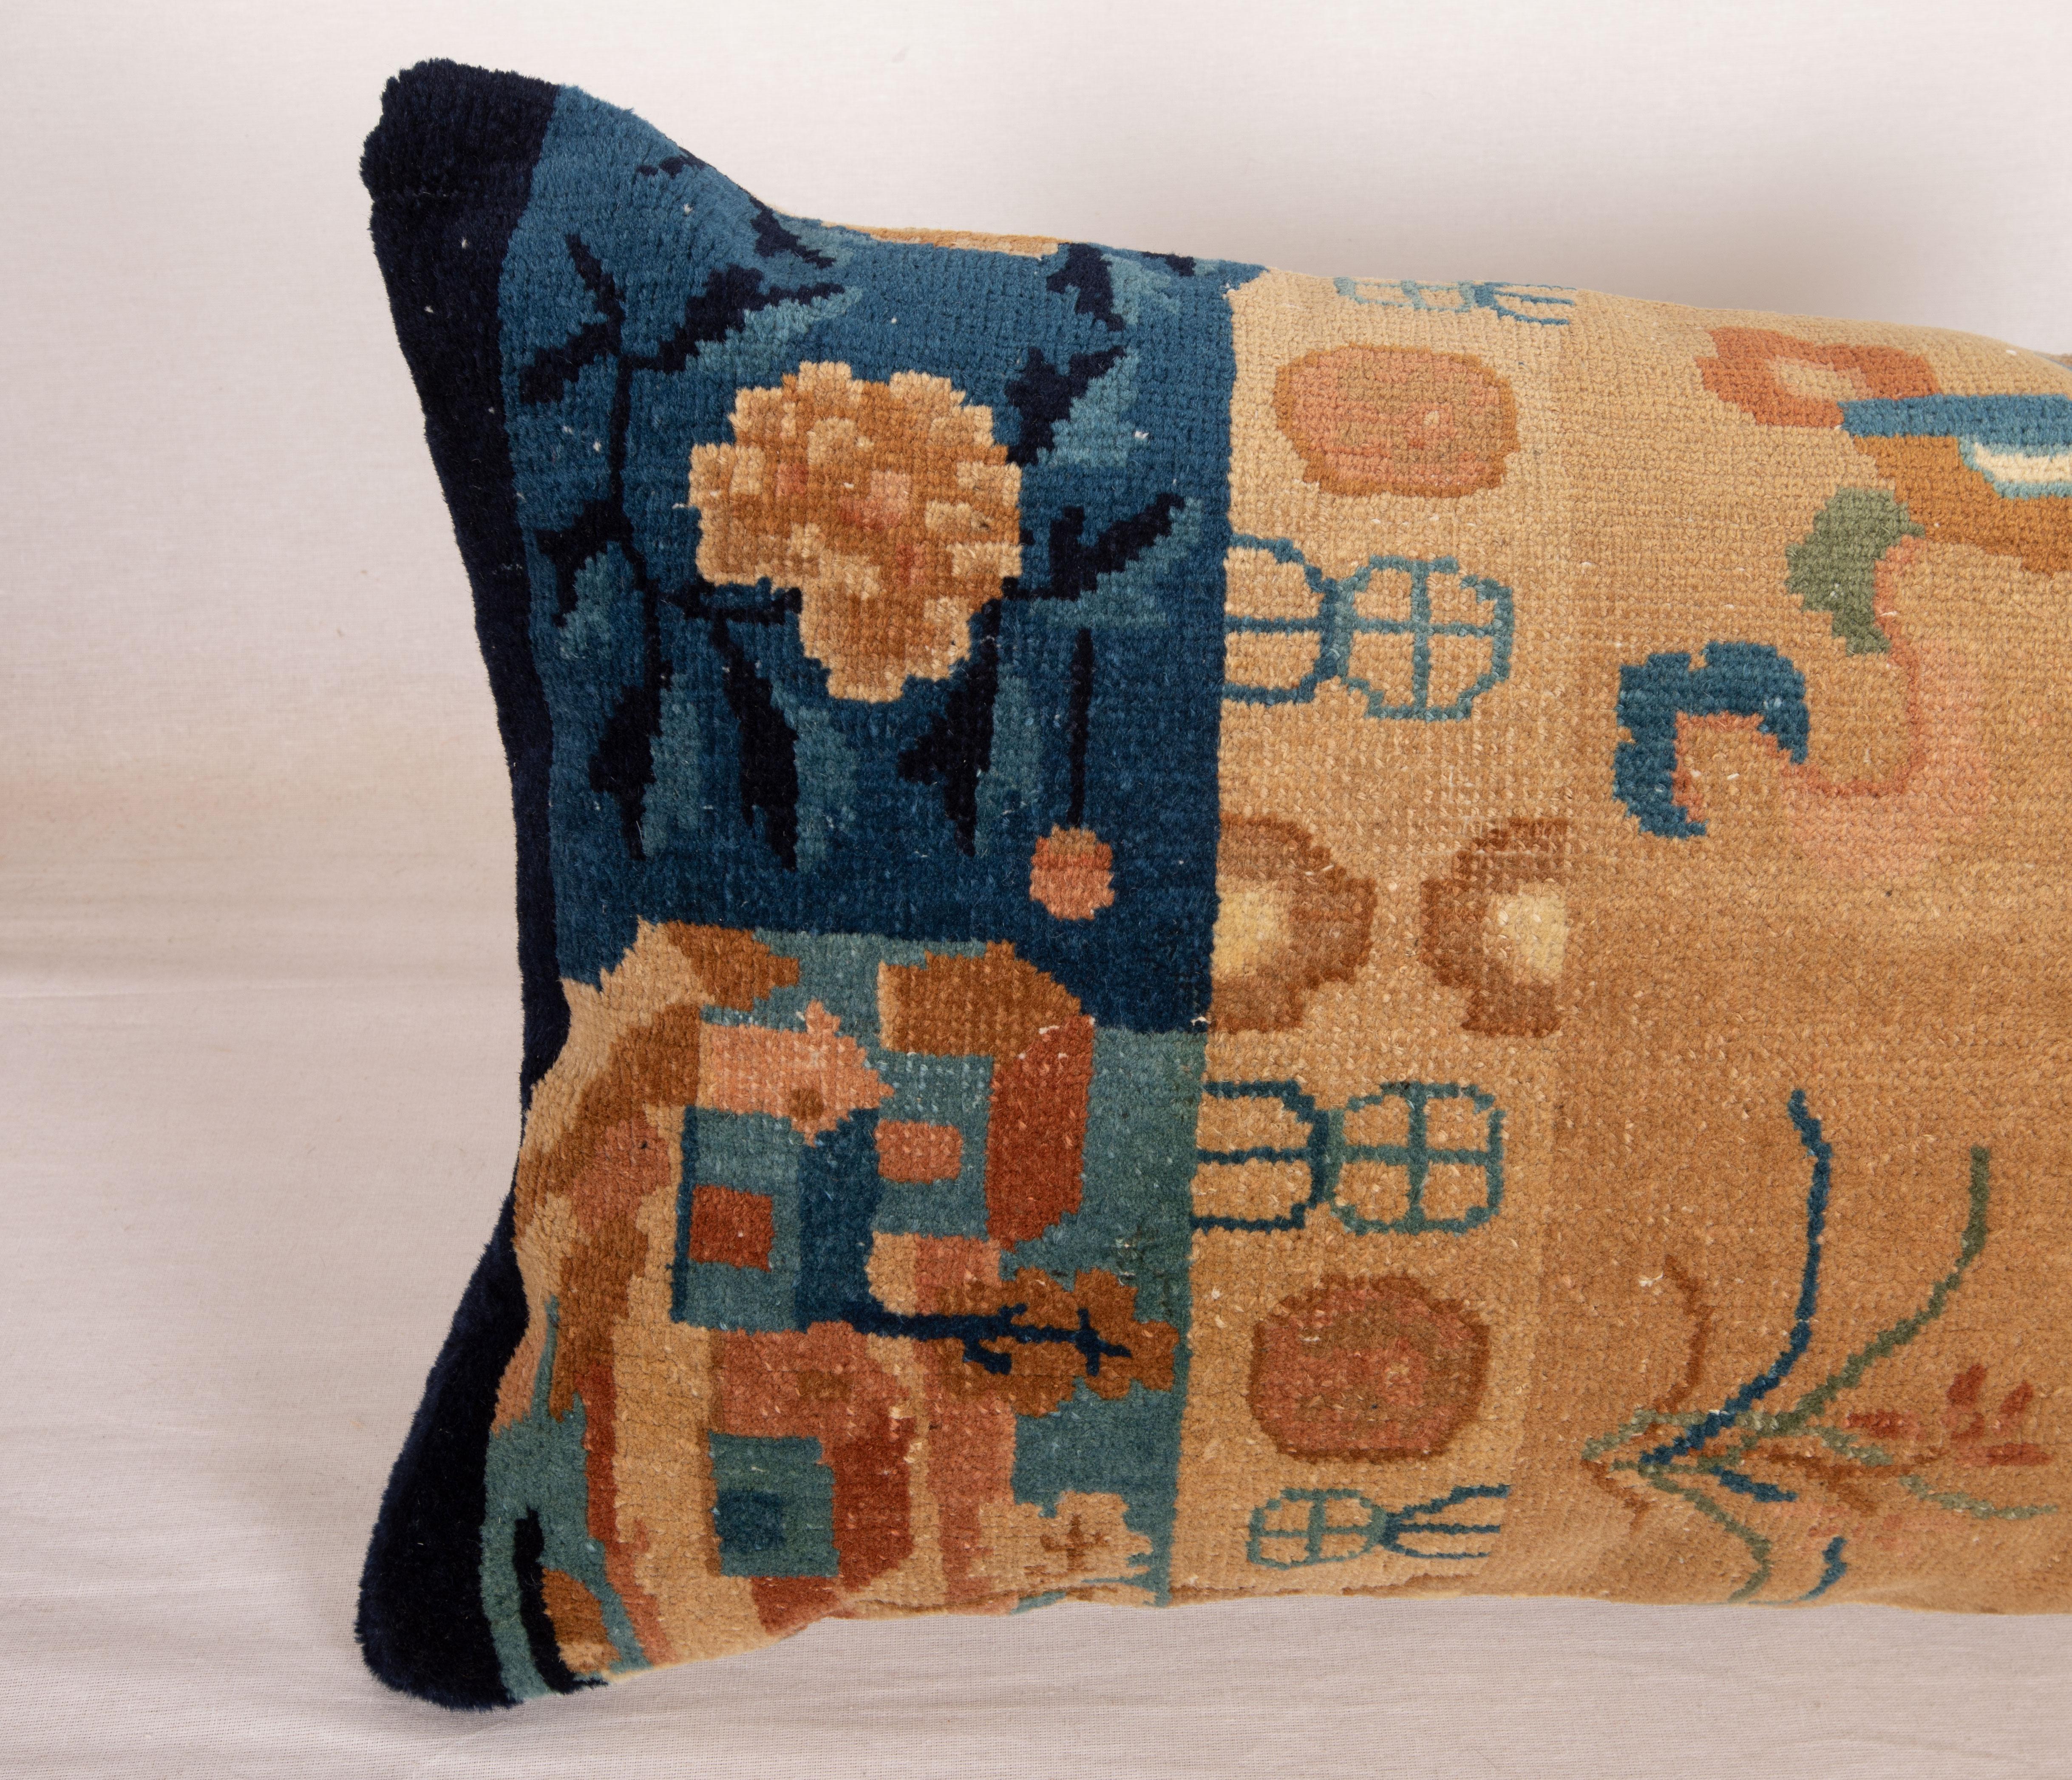 Hand-Woven Mid 20th C. Chinese Art Deco Rug Pillow Cover